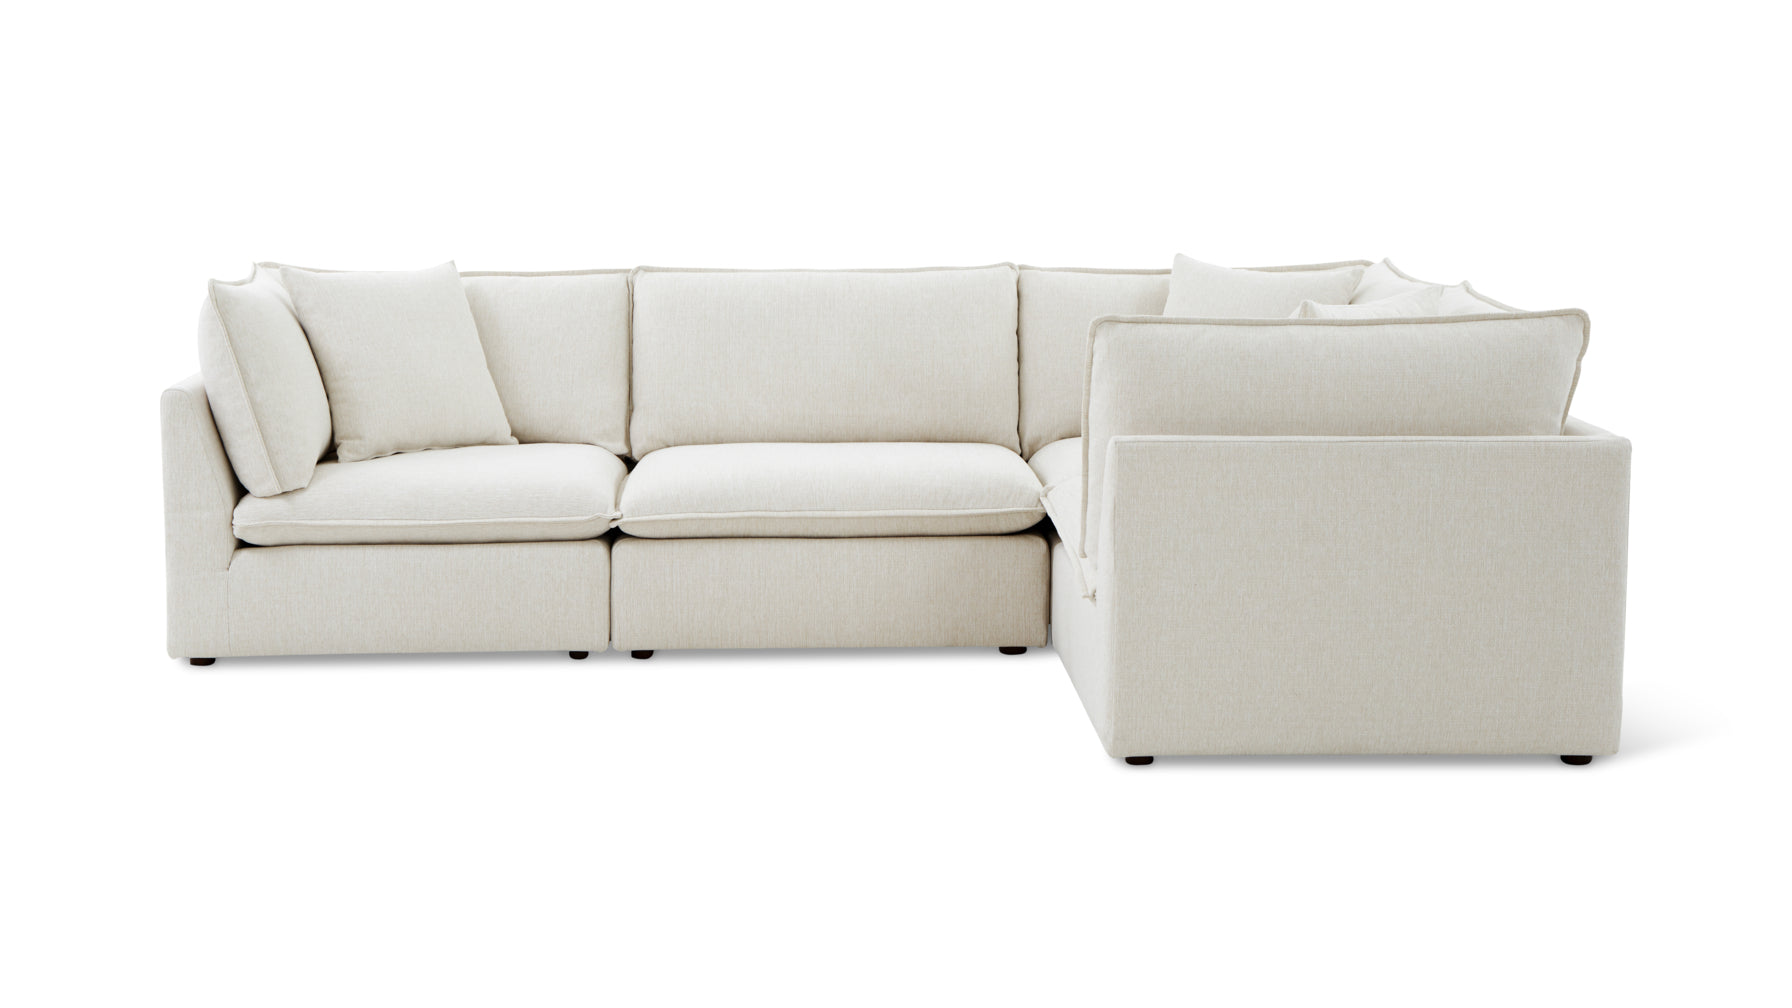 Chill Time 4-Piece Modular Sectional Closed, Birch - Image 1